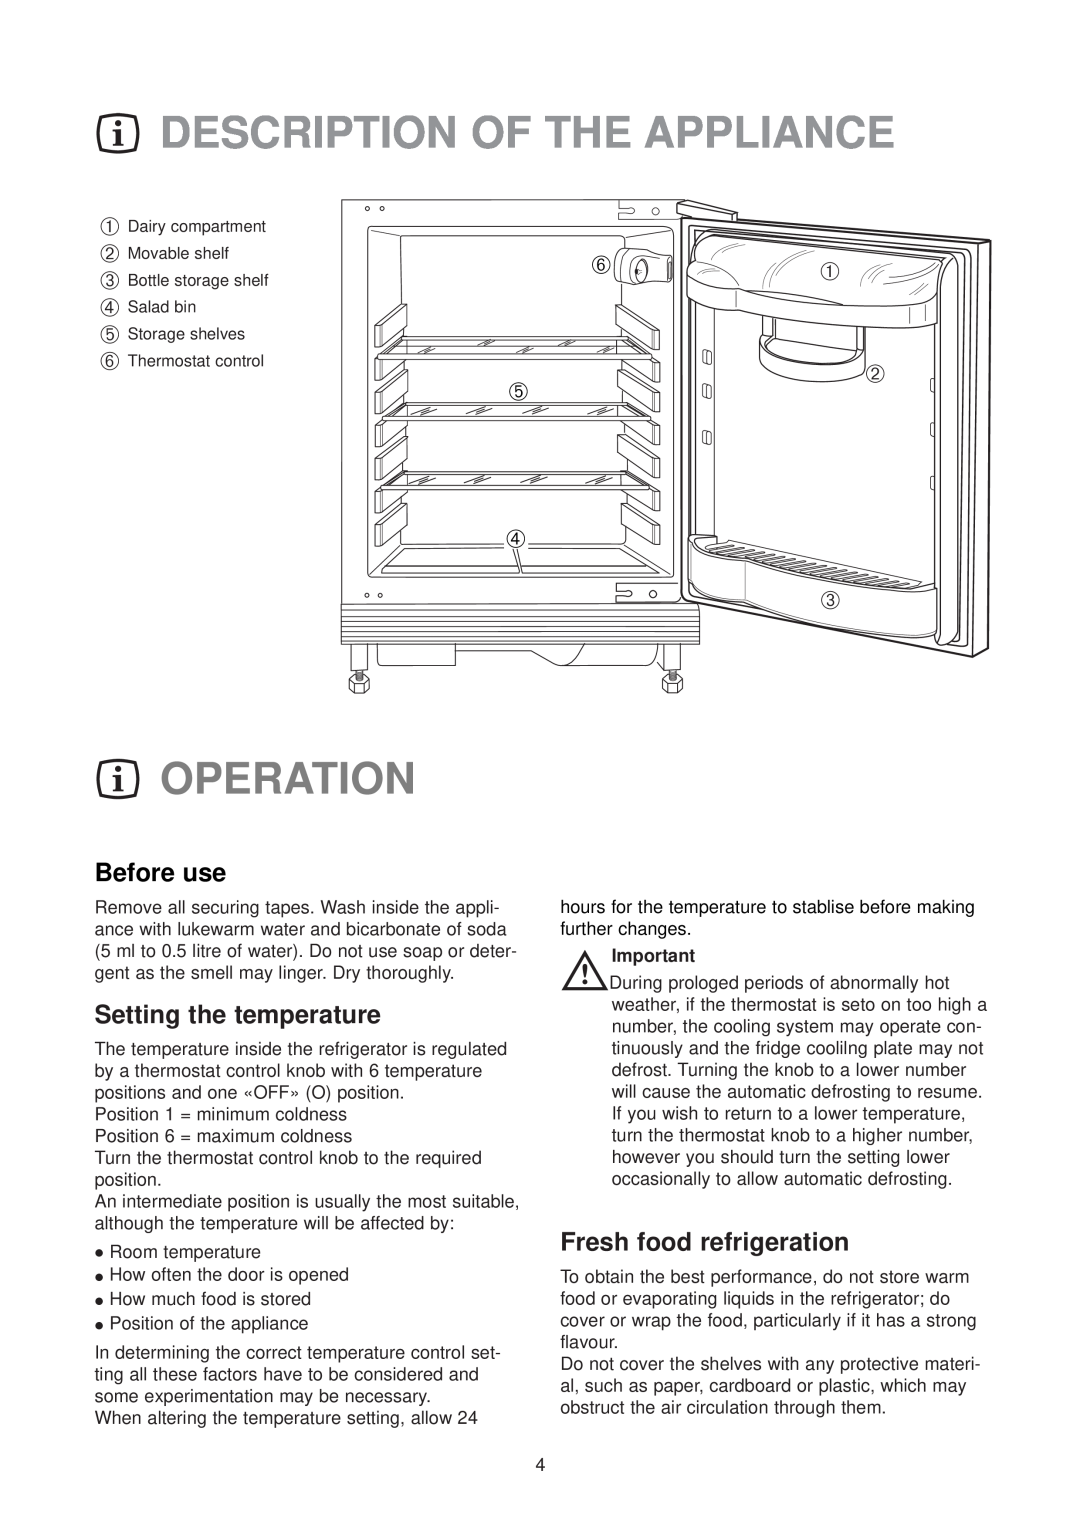 Zanussi ZUD 9154 Description Of The Appliance, Operation, Before use, Setting the temperature, Fresh food refrigeration 